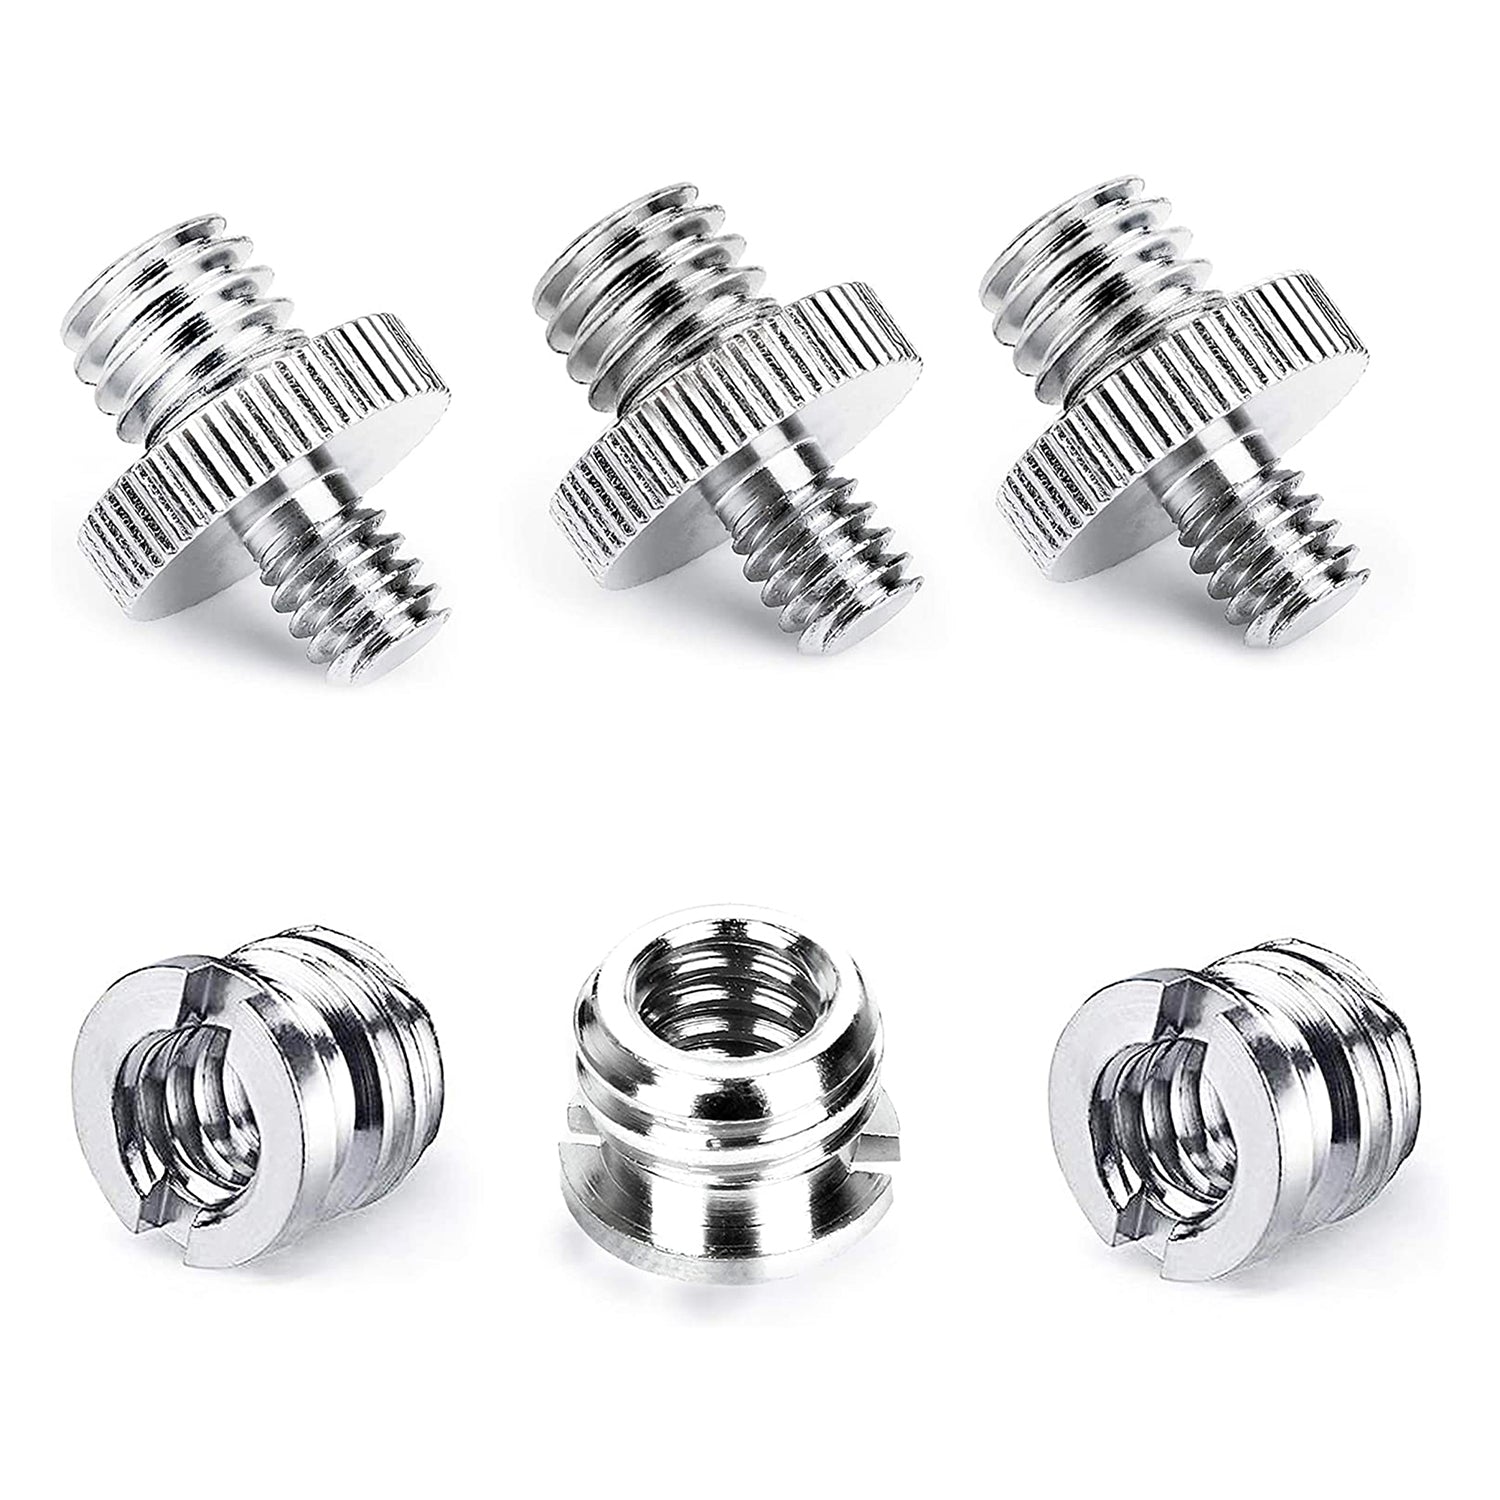 5 Core Mic Stand Adapter 3/8 Male to 1/4 Male Screw Adapter w Knurled Surface Precise Thread Adopter